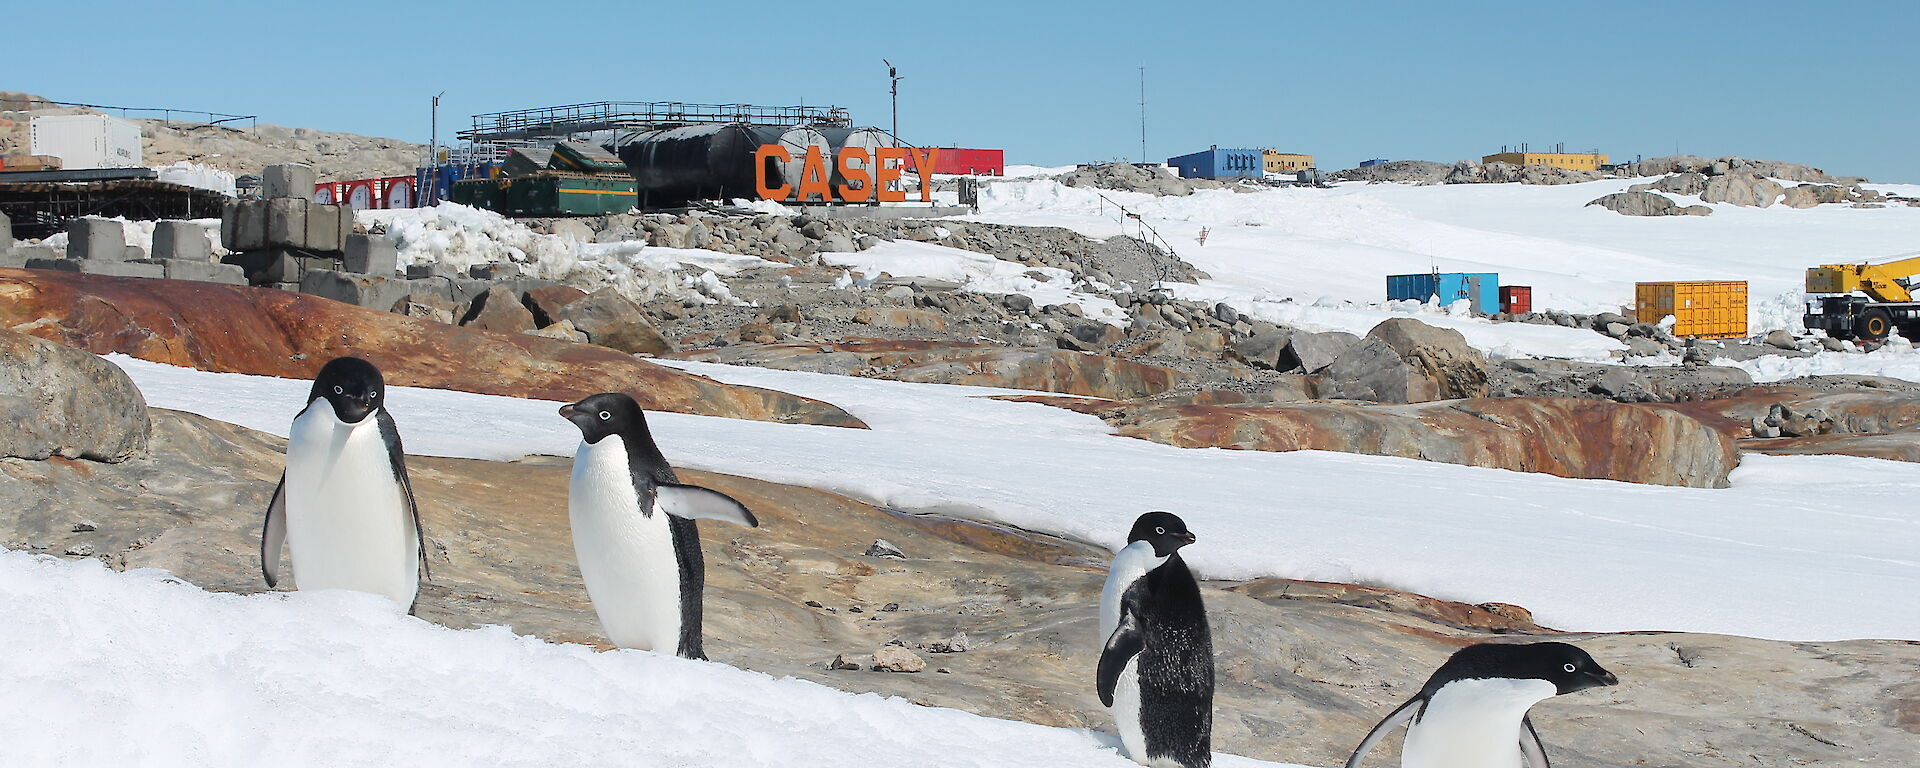 Forground four adelie penguins stadning in different positions on snow covered ground. In background the Casey wharf area with lower fuel farm and shipping containers. Centre back large CASEY sign in orange letters.